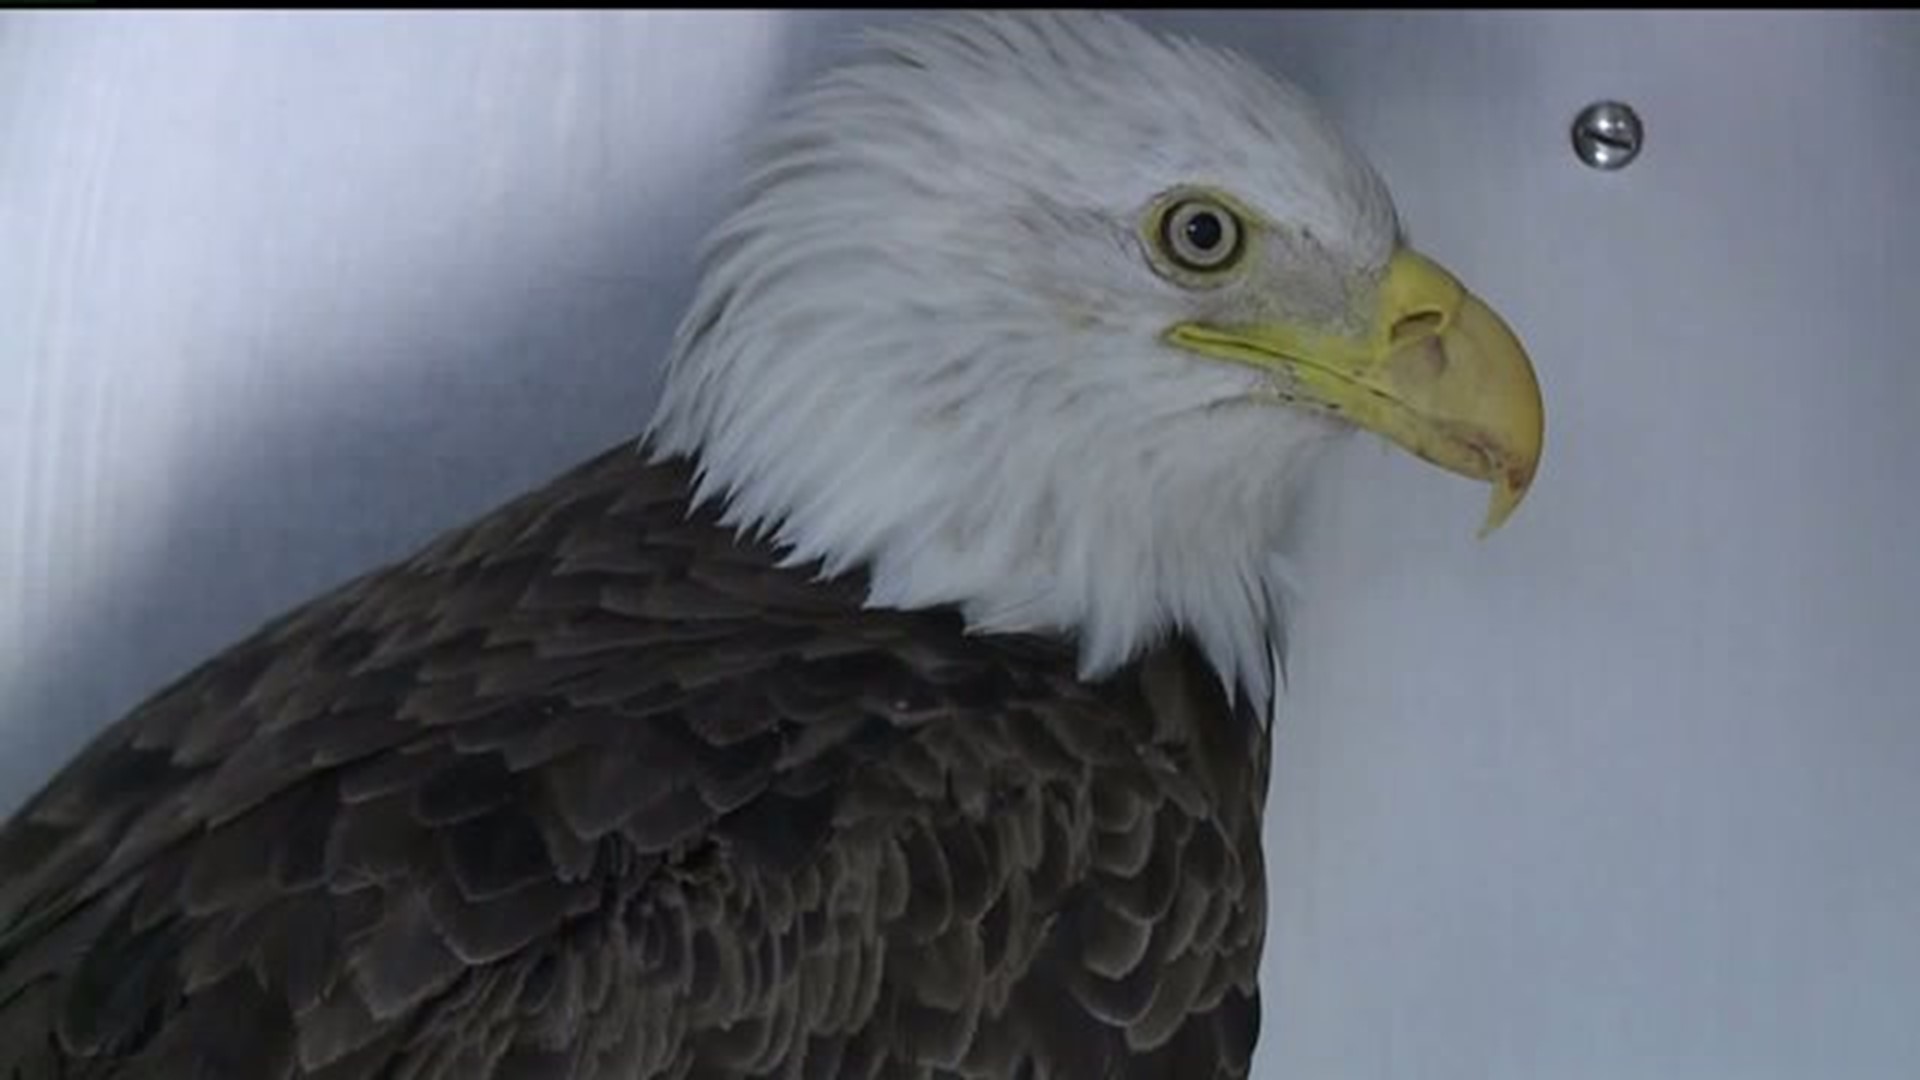 Rescued bald eagle receives veterinary care